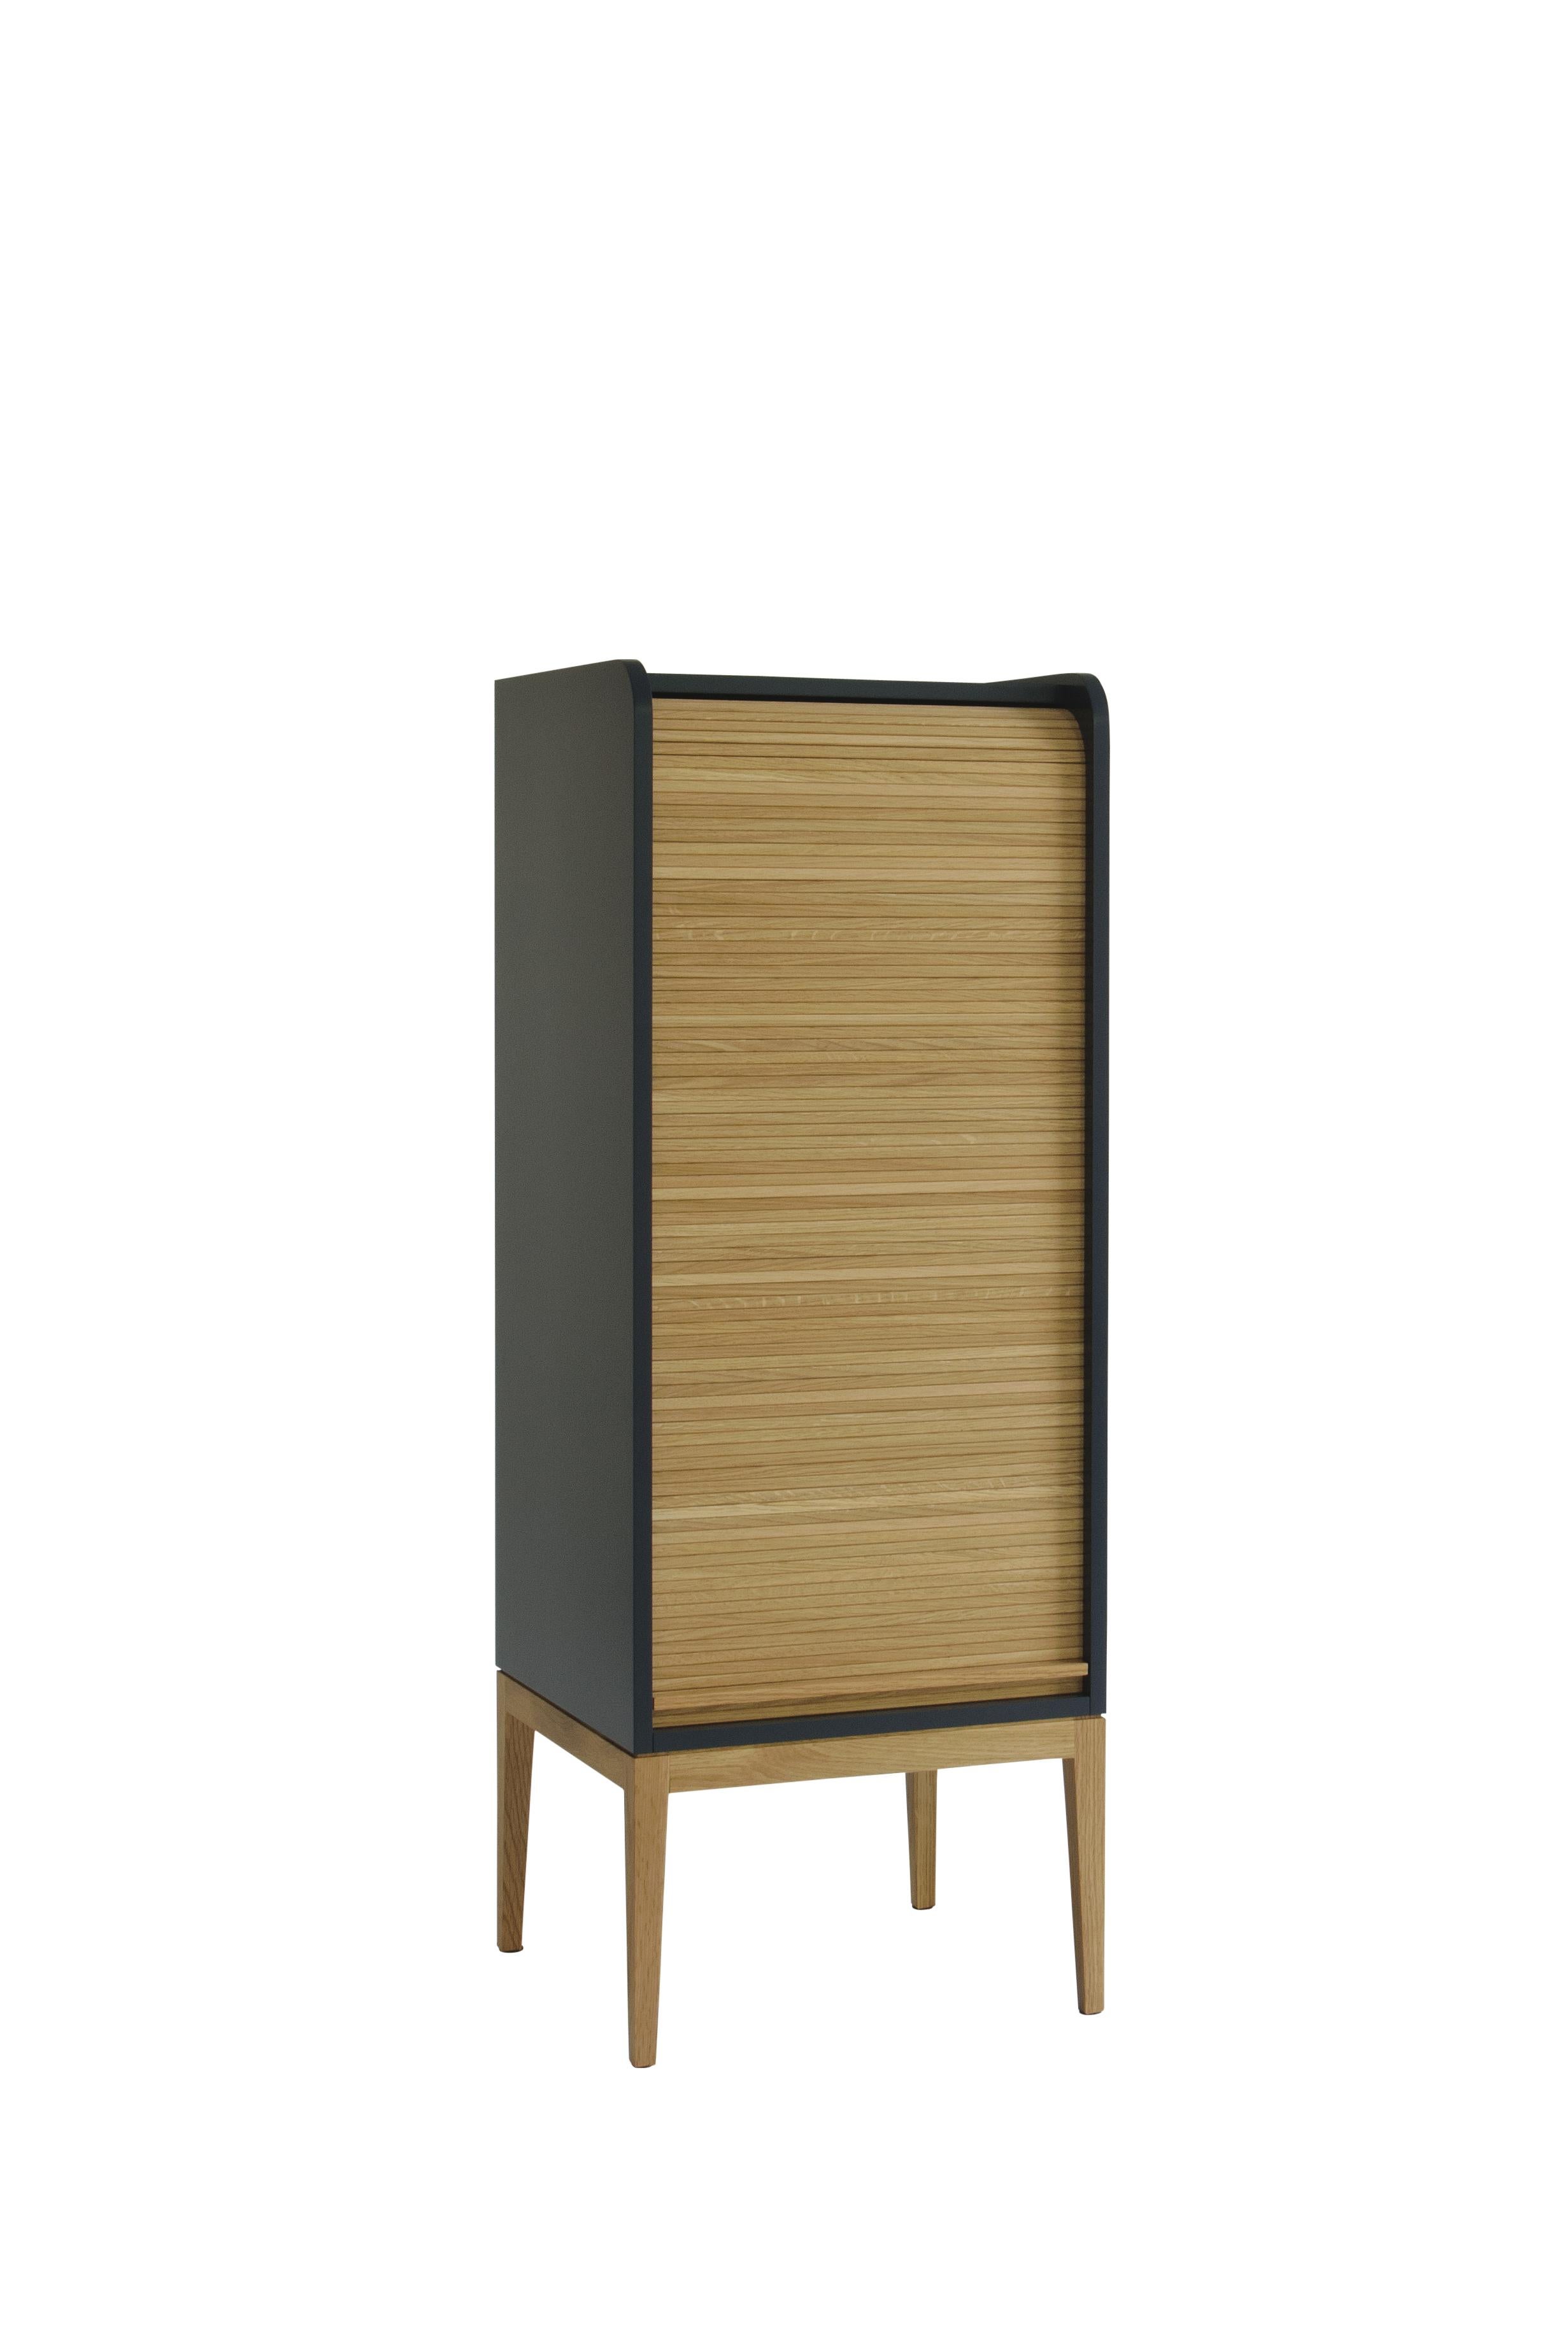 Tapparelle medium cabinet, blue / gray by Colé Italia with Emmanuel Gallina
Dimensions: H.115 D.42 W.42 cm.
Materials: Container with legs and “tapparella” sliding shutter in solid oak.
Matt lacquered structure; inside 2 oak veneered shelf

Also